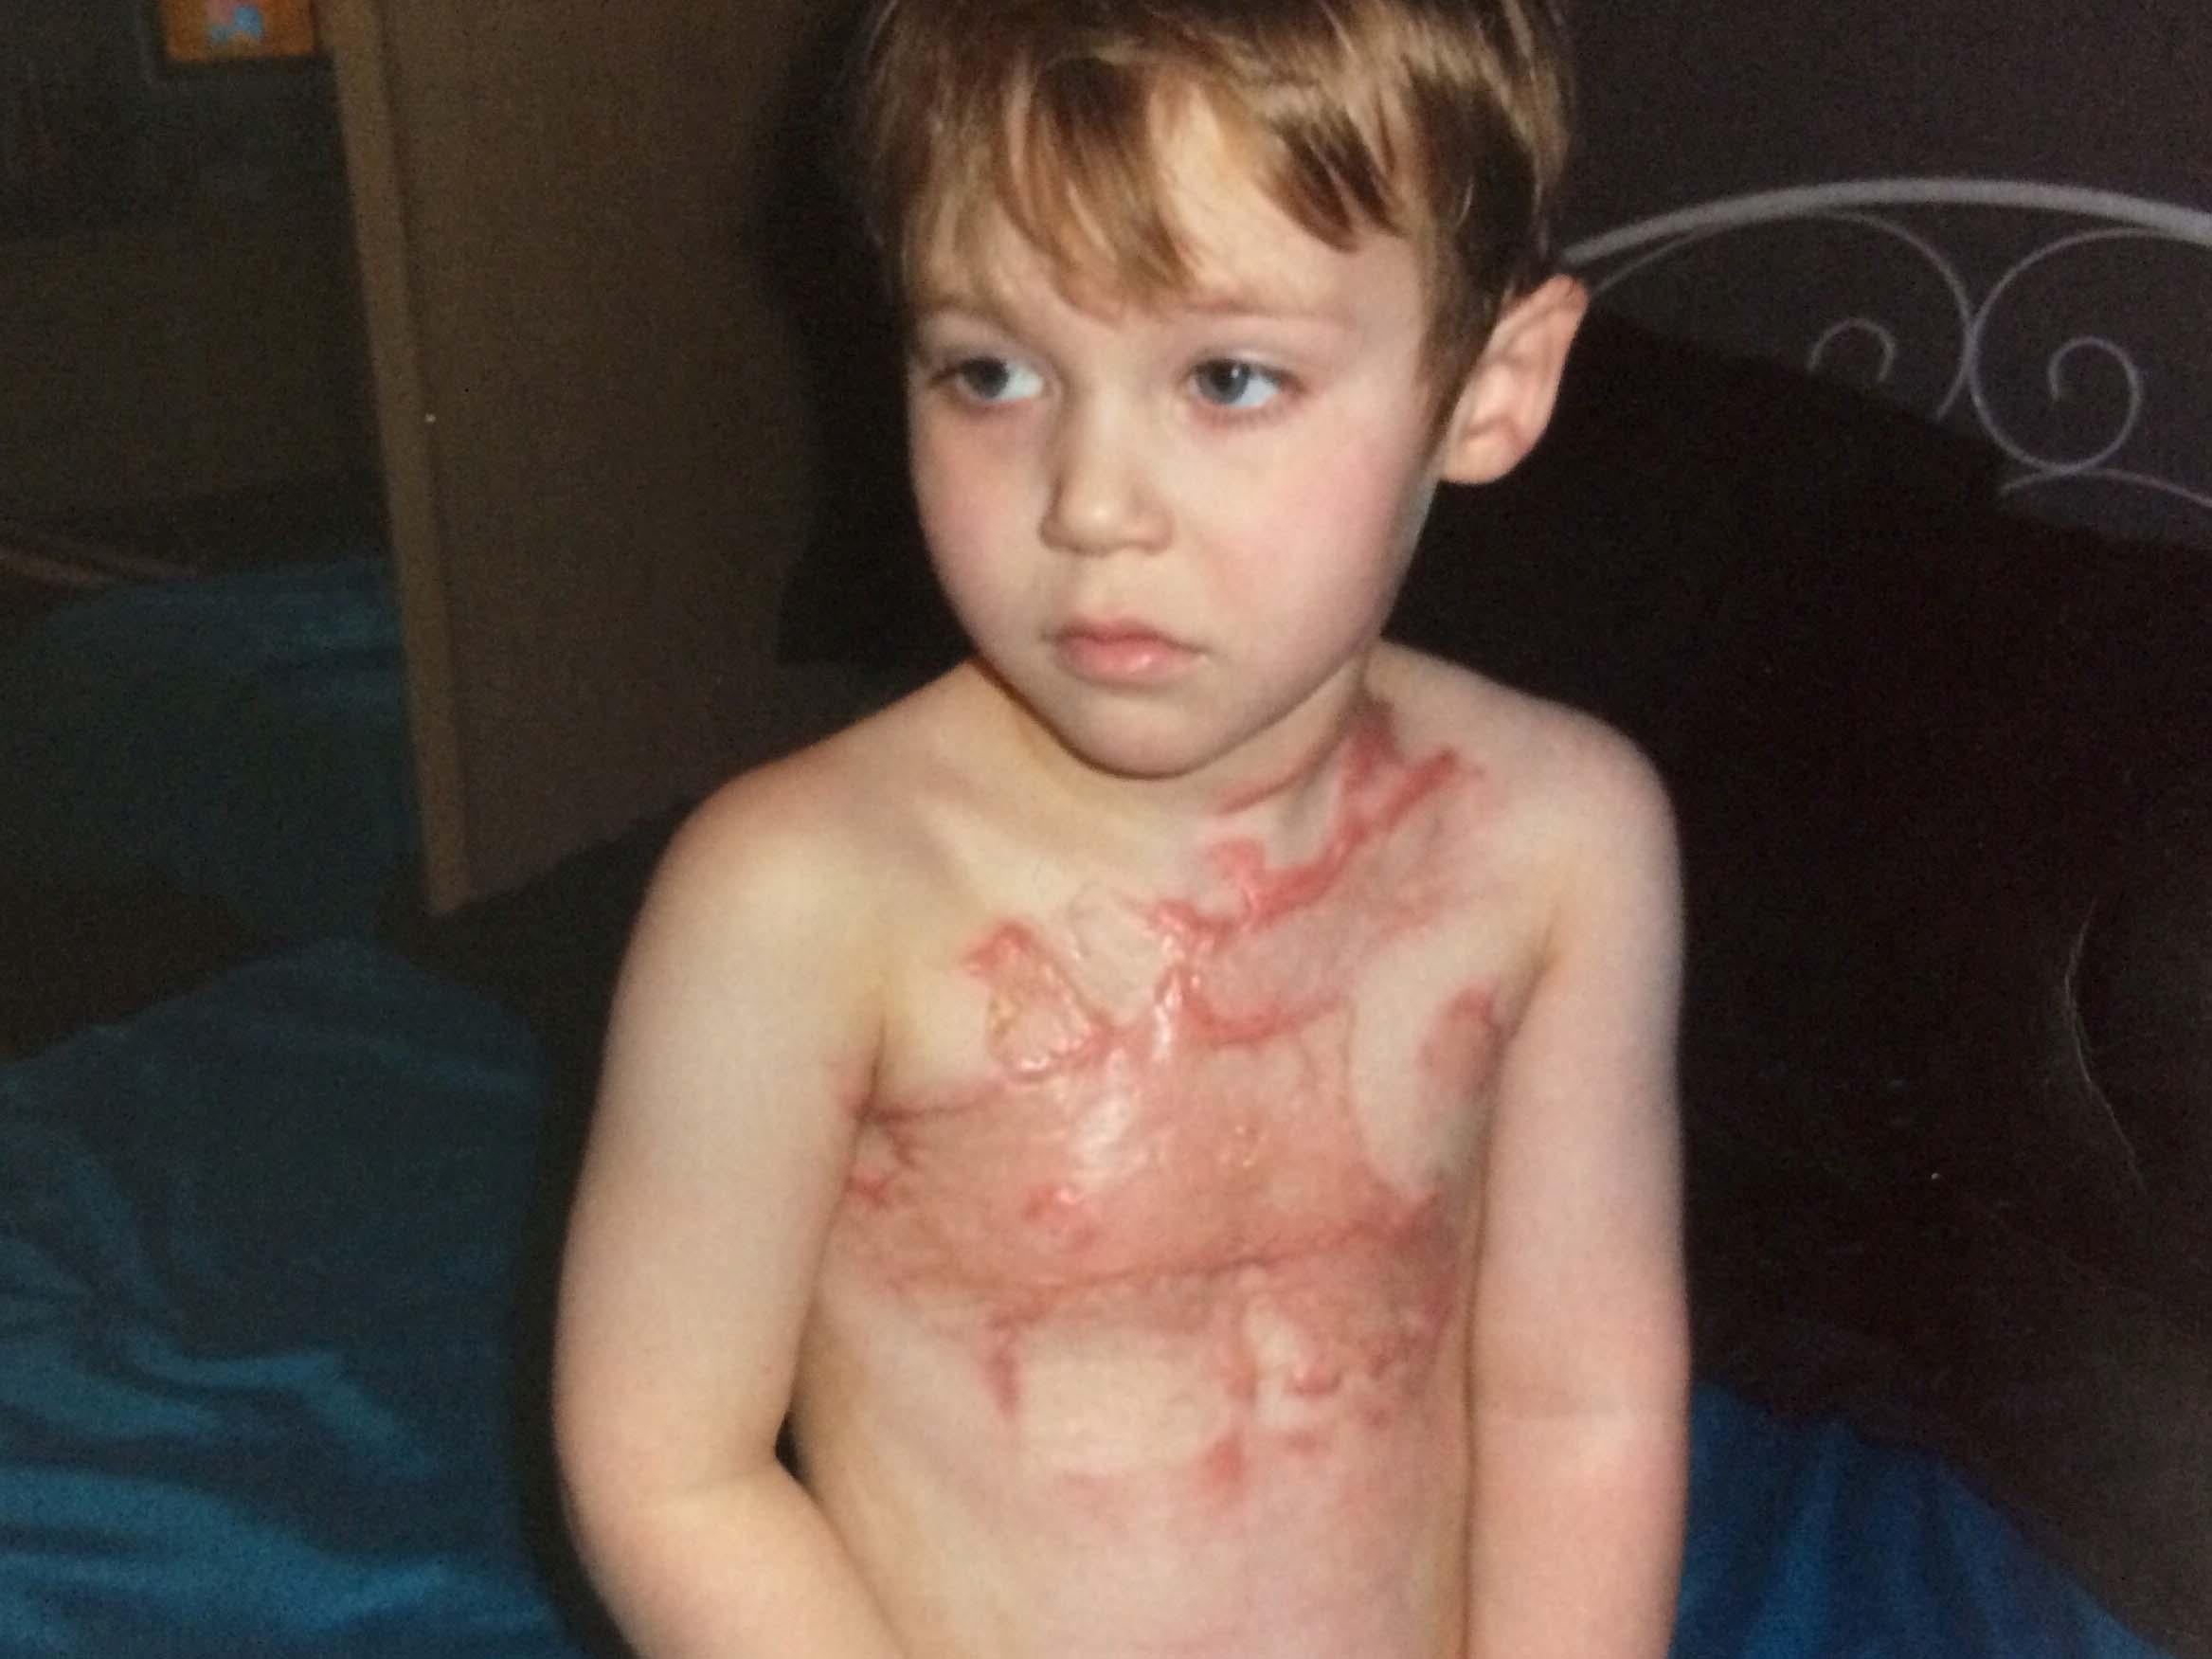 Ben was just four years old when a stray firework landed on him